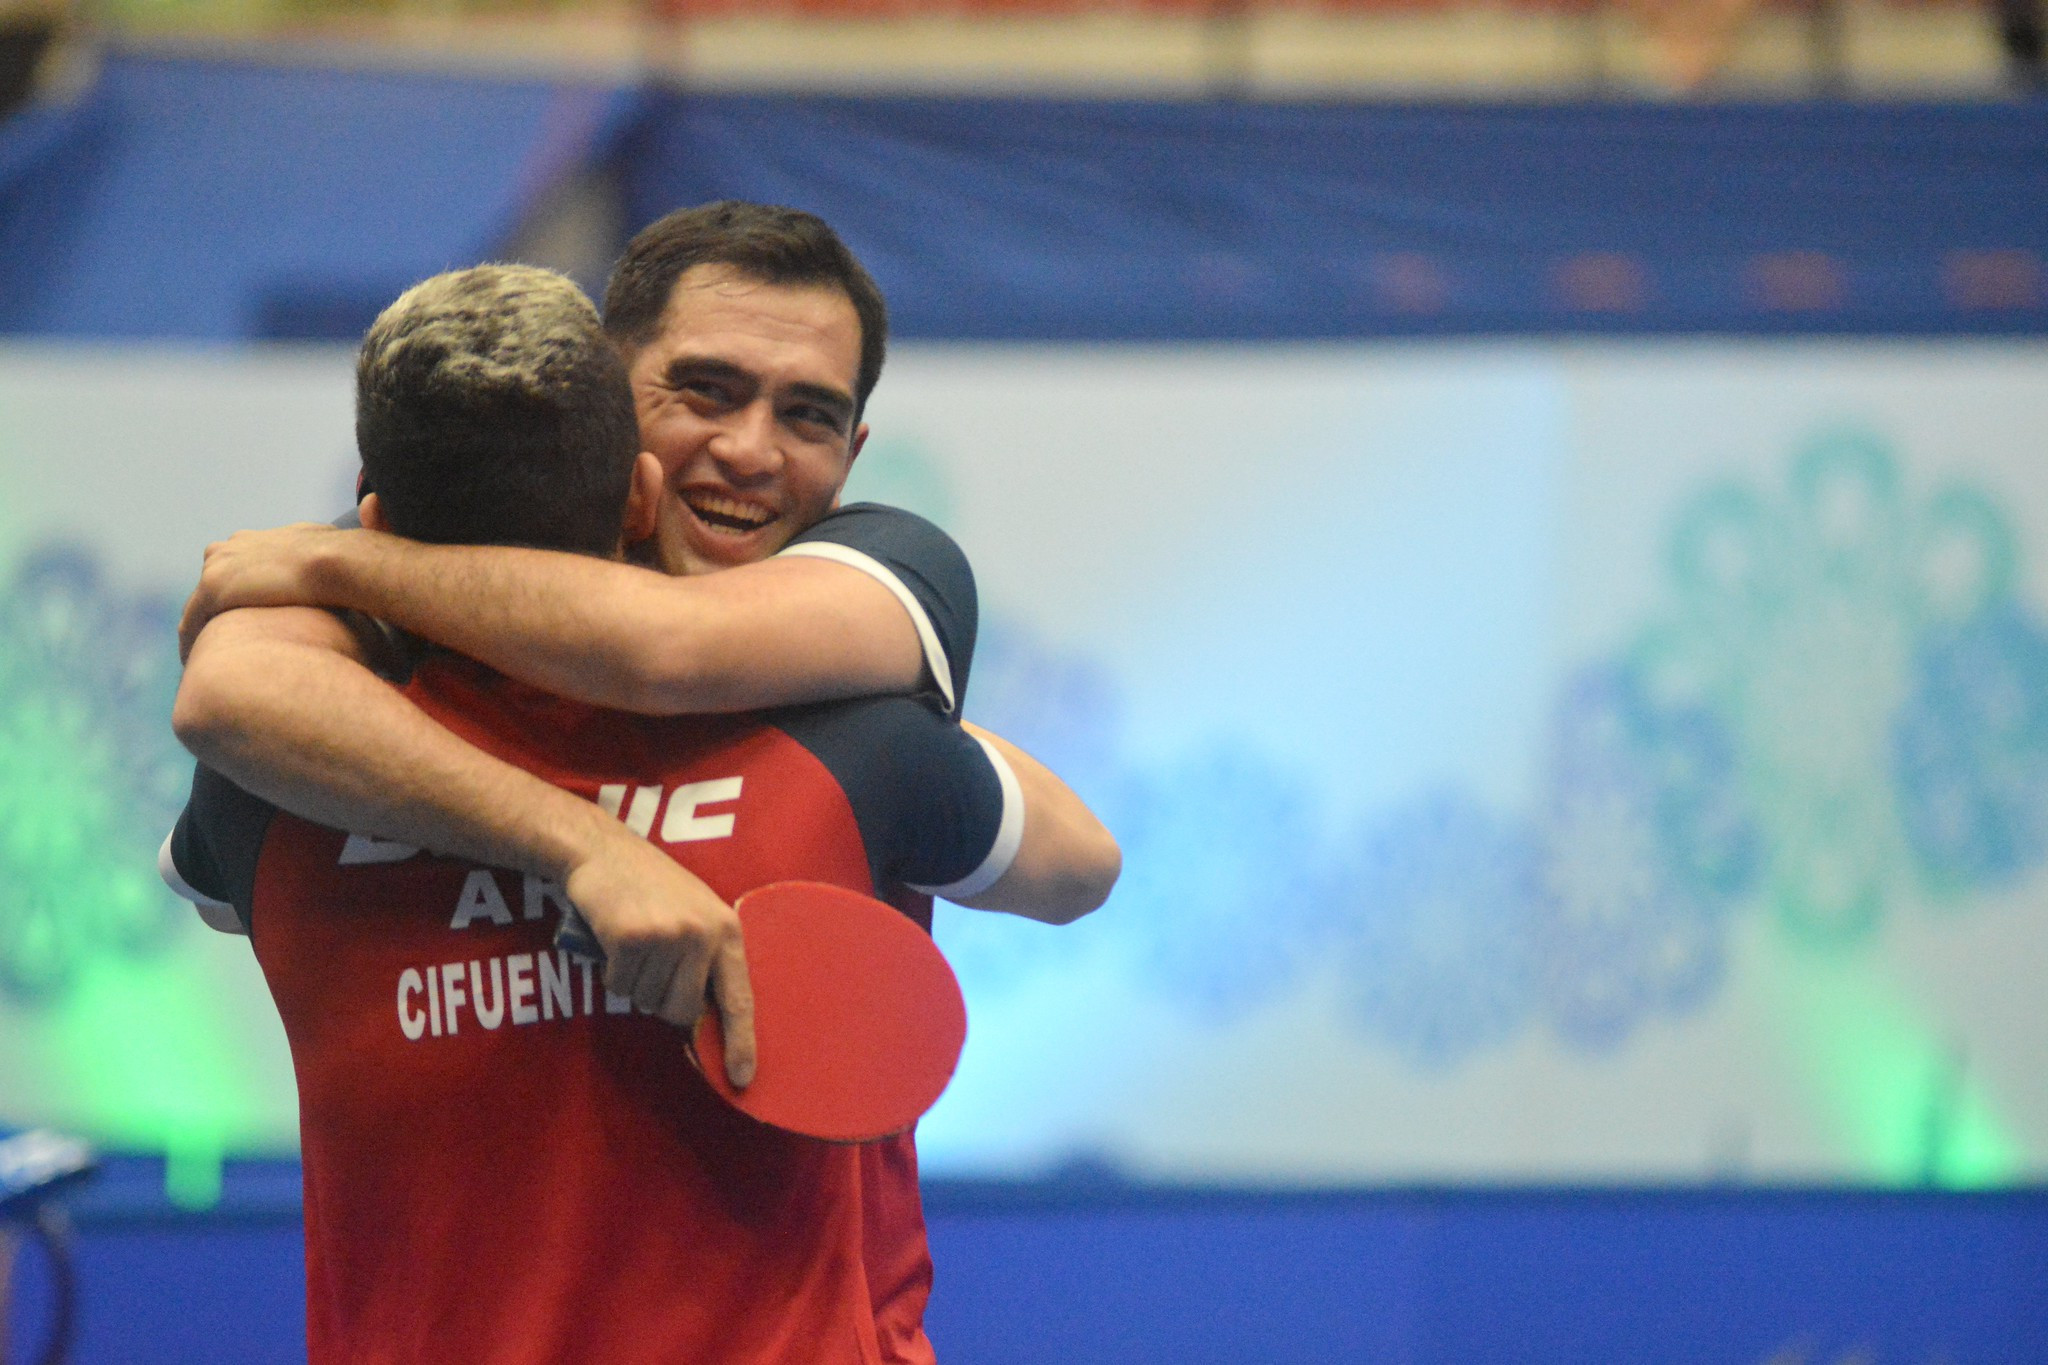 Gaston Alto and Horacio Cifuentes of Argentina won the mixed doubles title ©ITTF